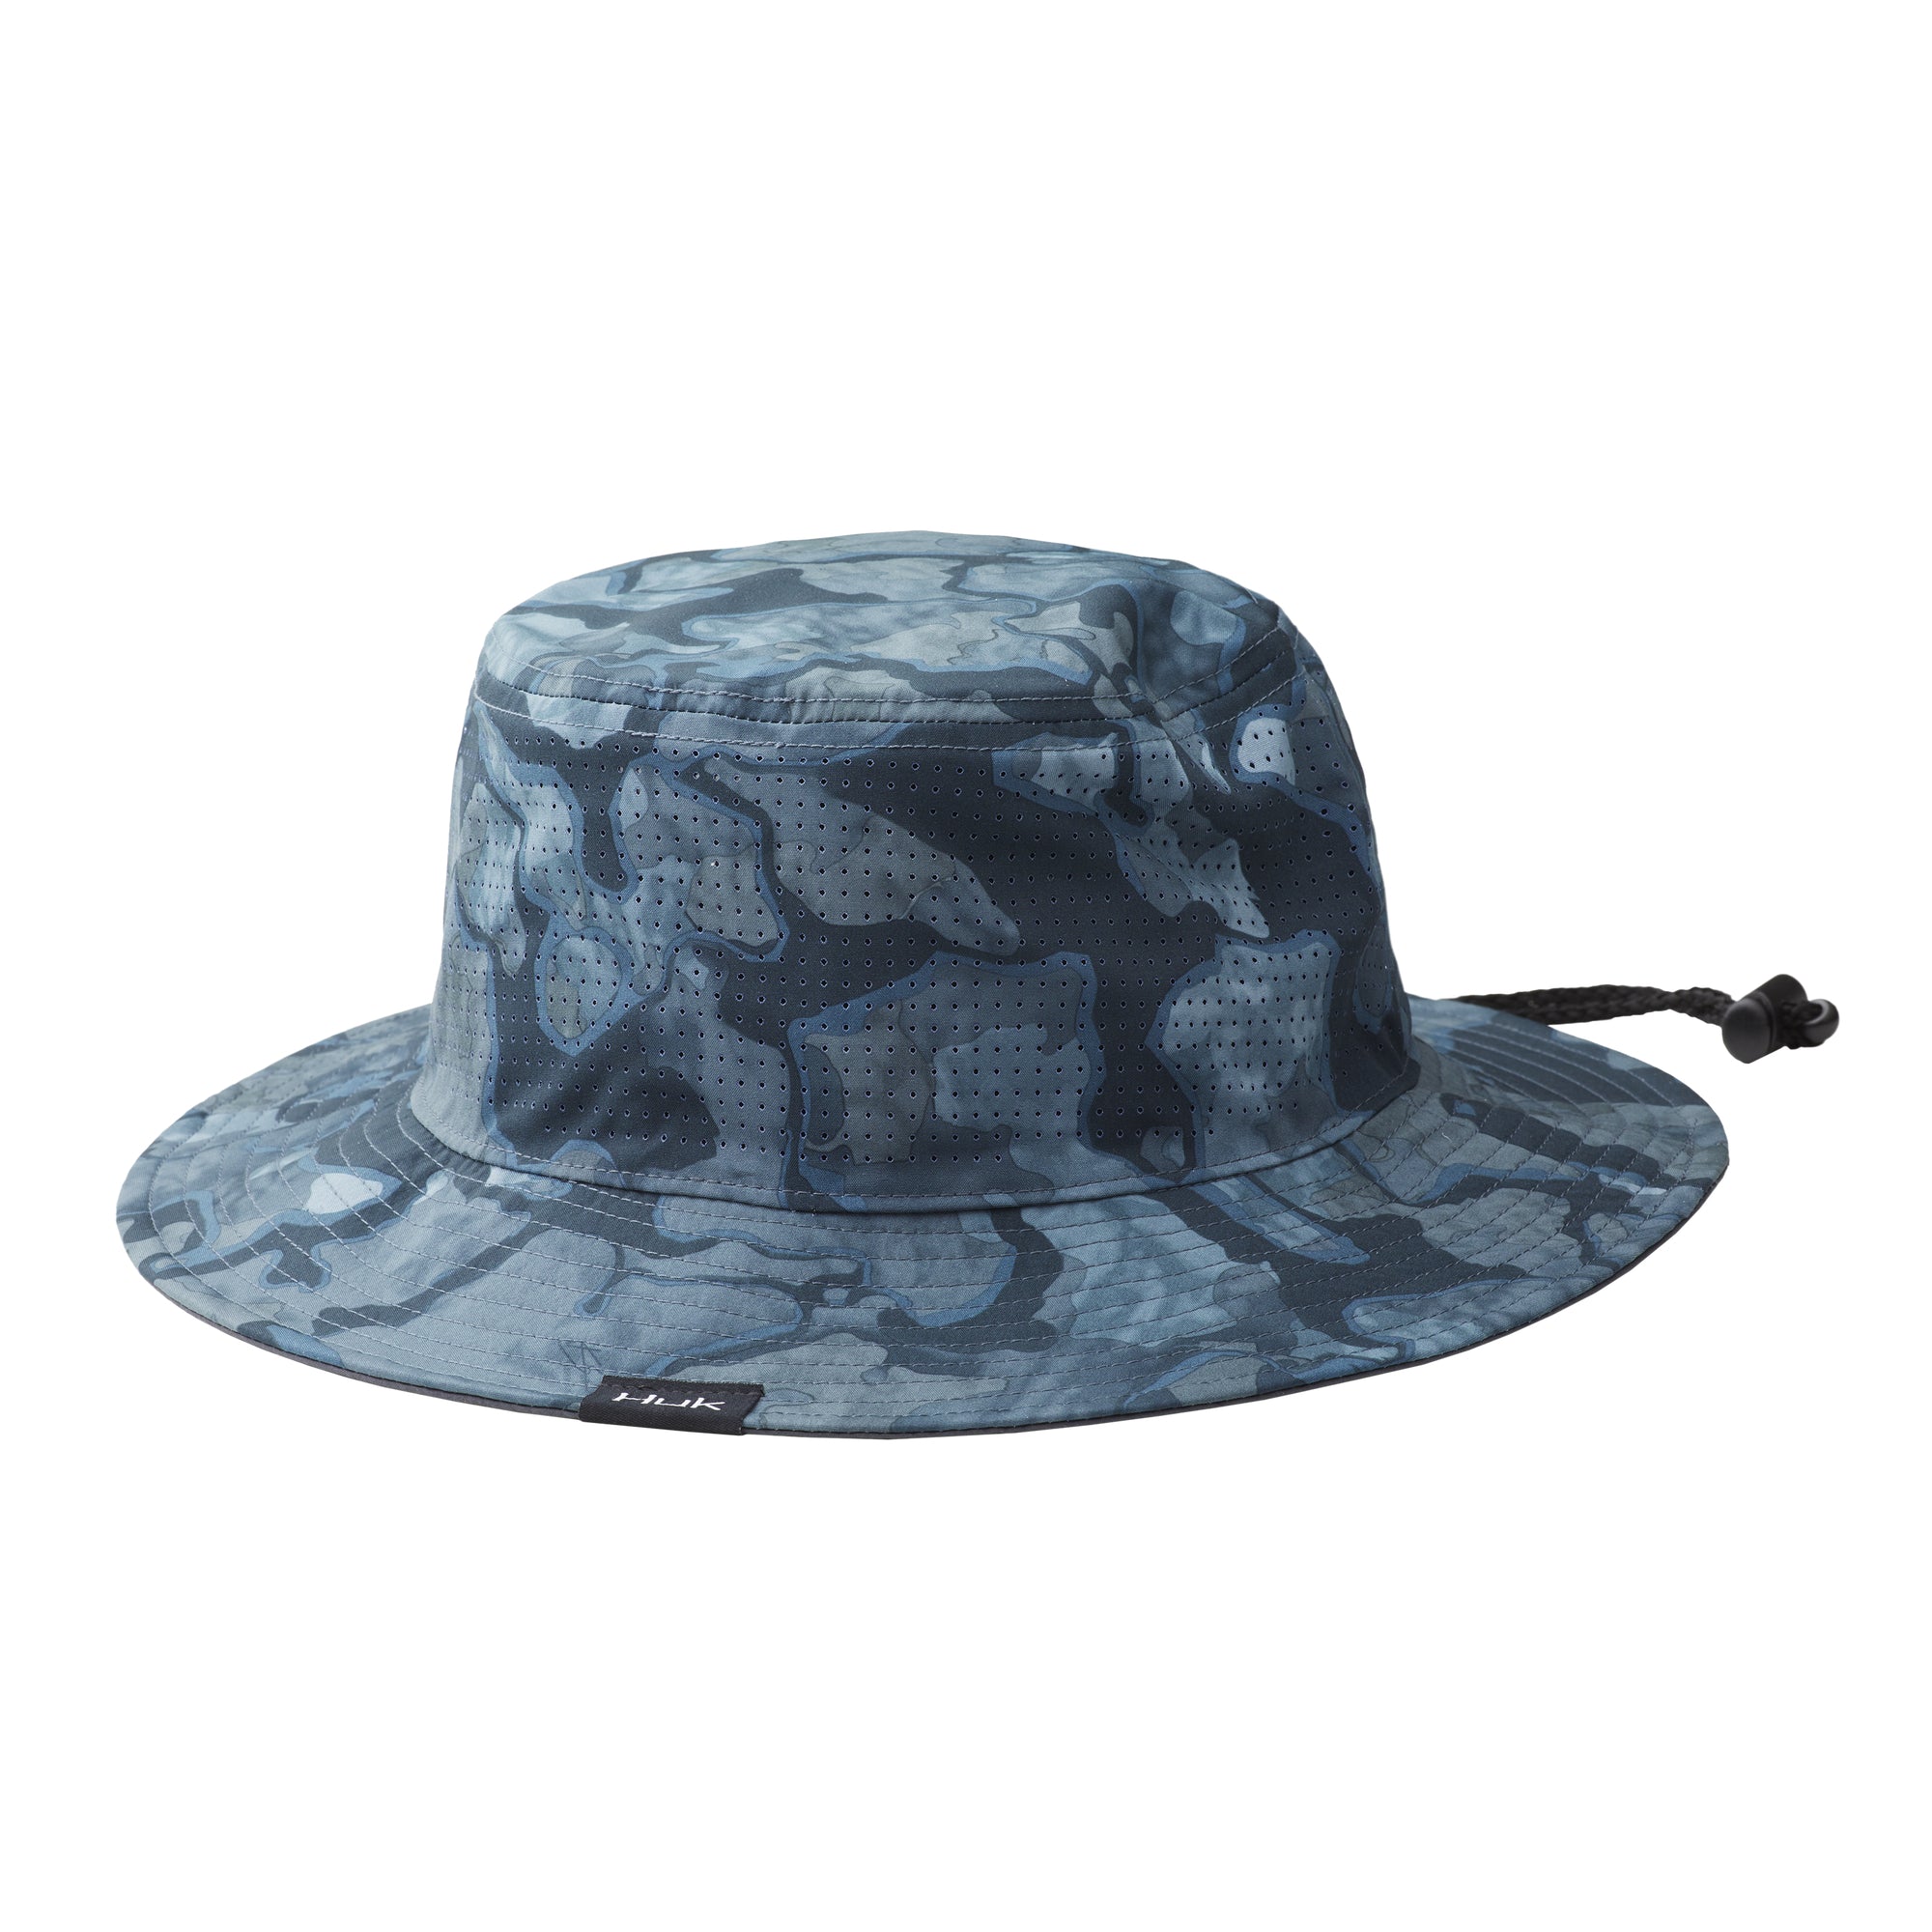 Huk Current Camo Bucket Fishing Hat – Natural Sports - The Fishing Store